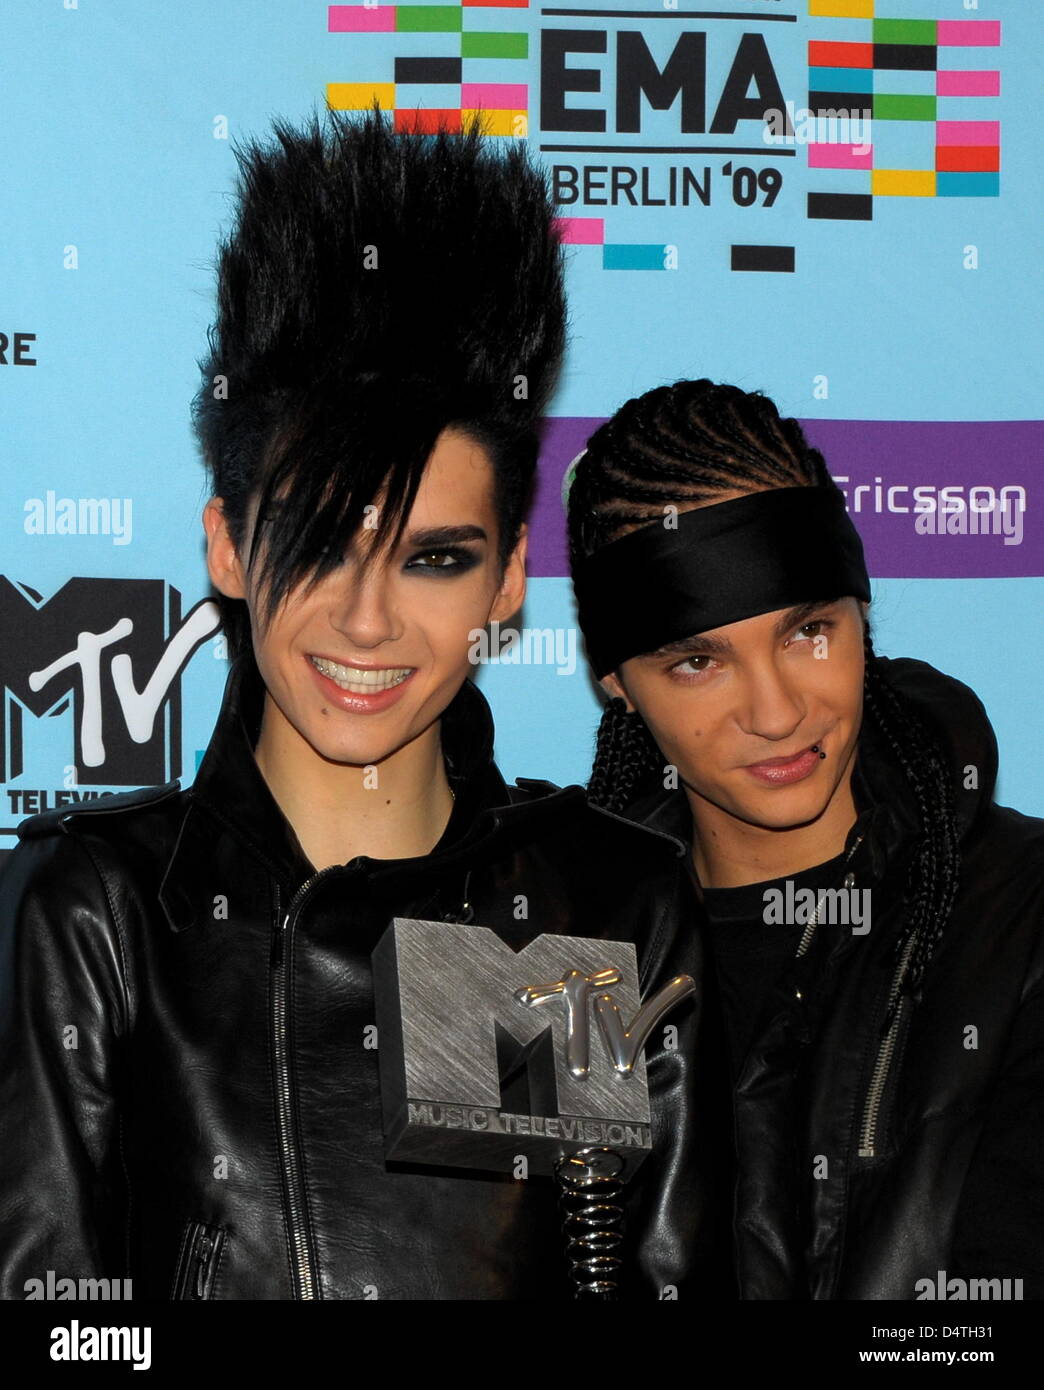 Bill Kaulitz (L) and his brother Tom Kaulitz of the German band Tokio Hotel  pose during a photo call at the MTV Europe Music Awards at O2 World in  Berlin, Germany, 05